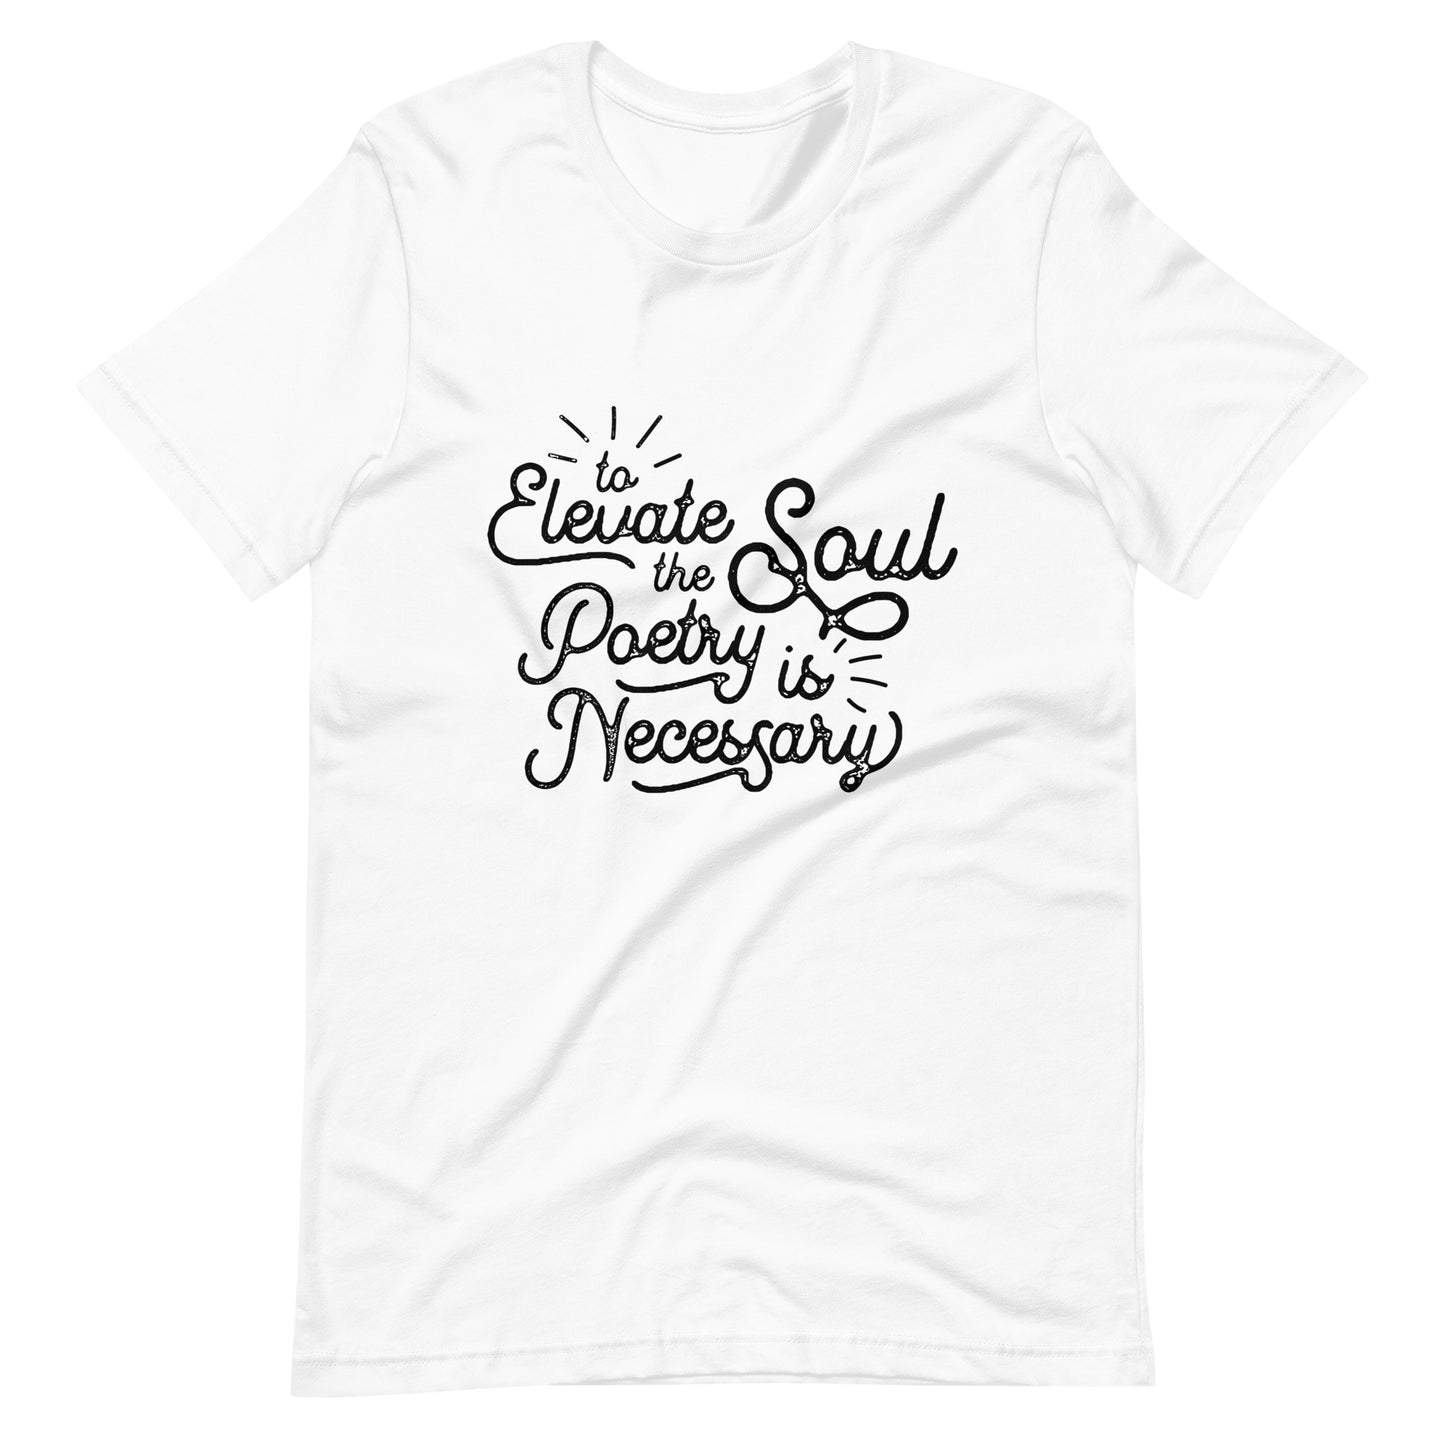 To Elevate the Soul Edgar Allan Poe Quote - Men's t-shirt - White Front